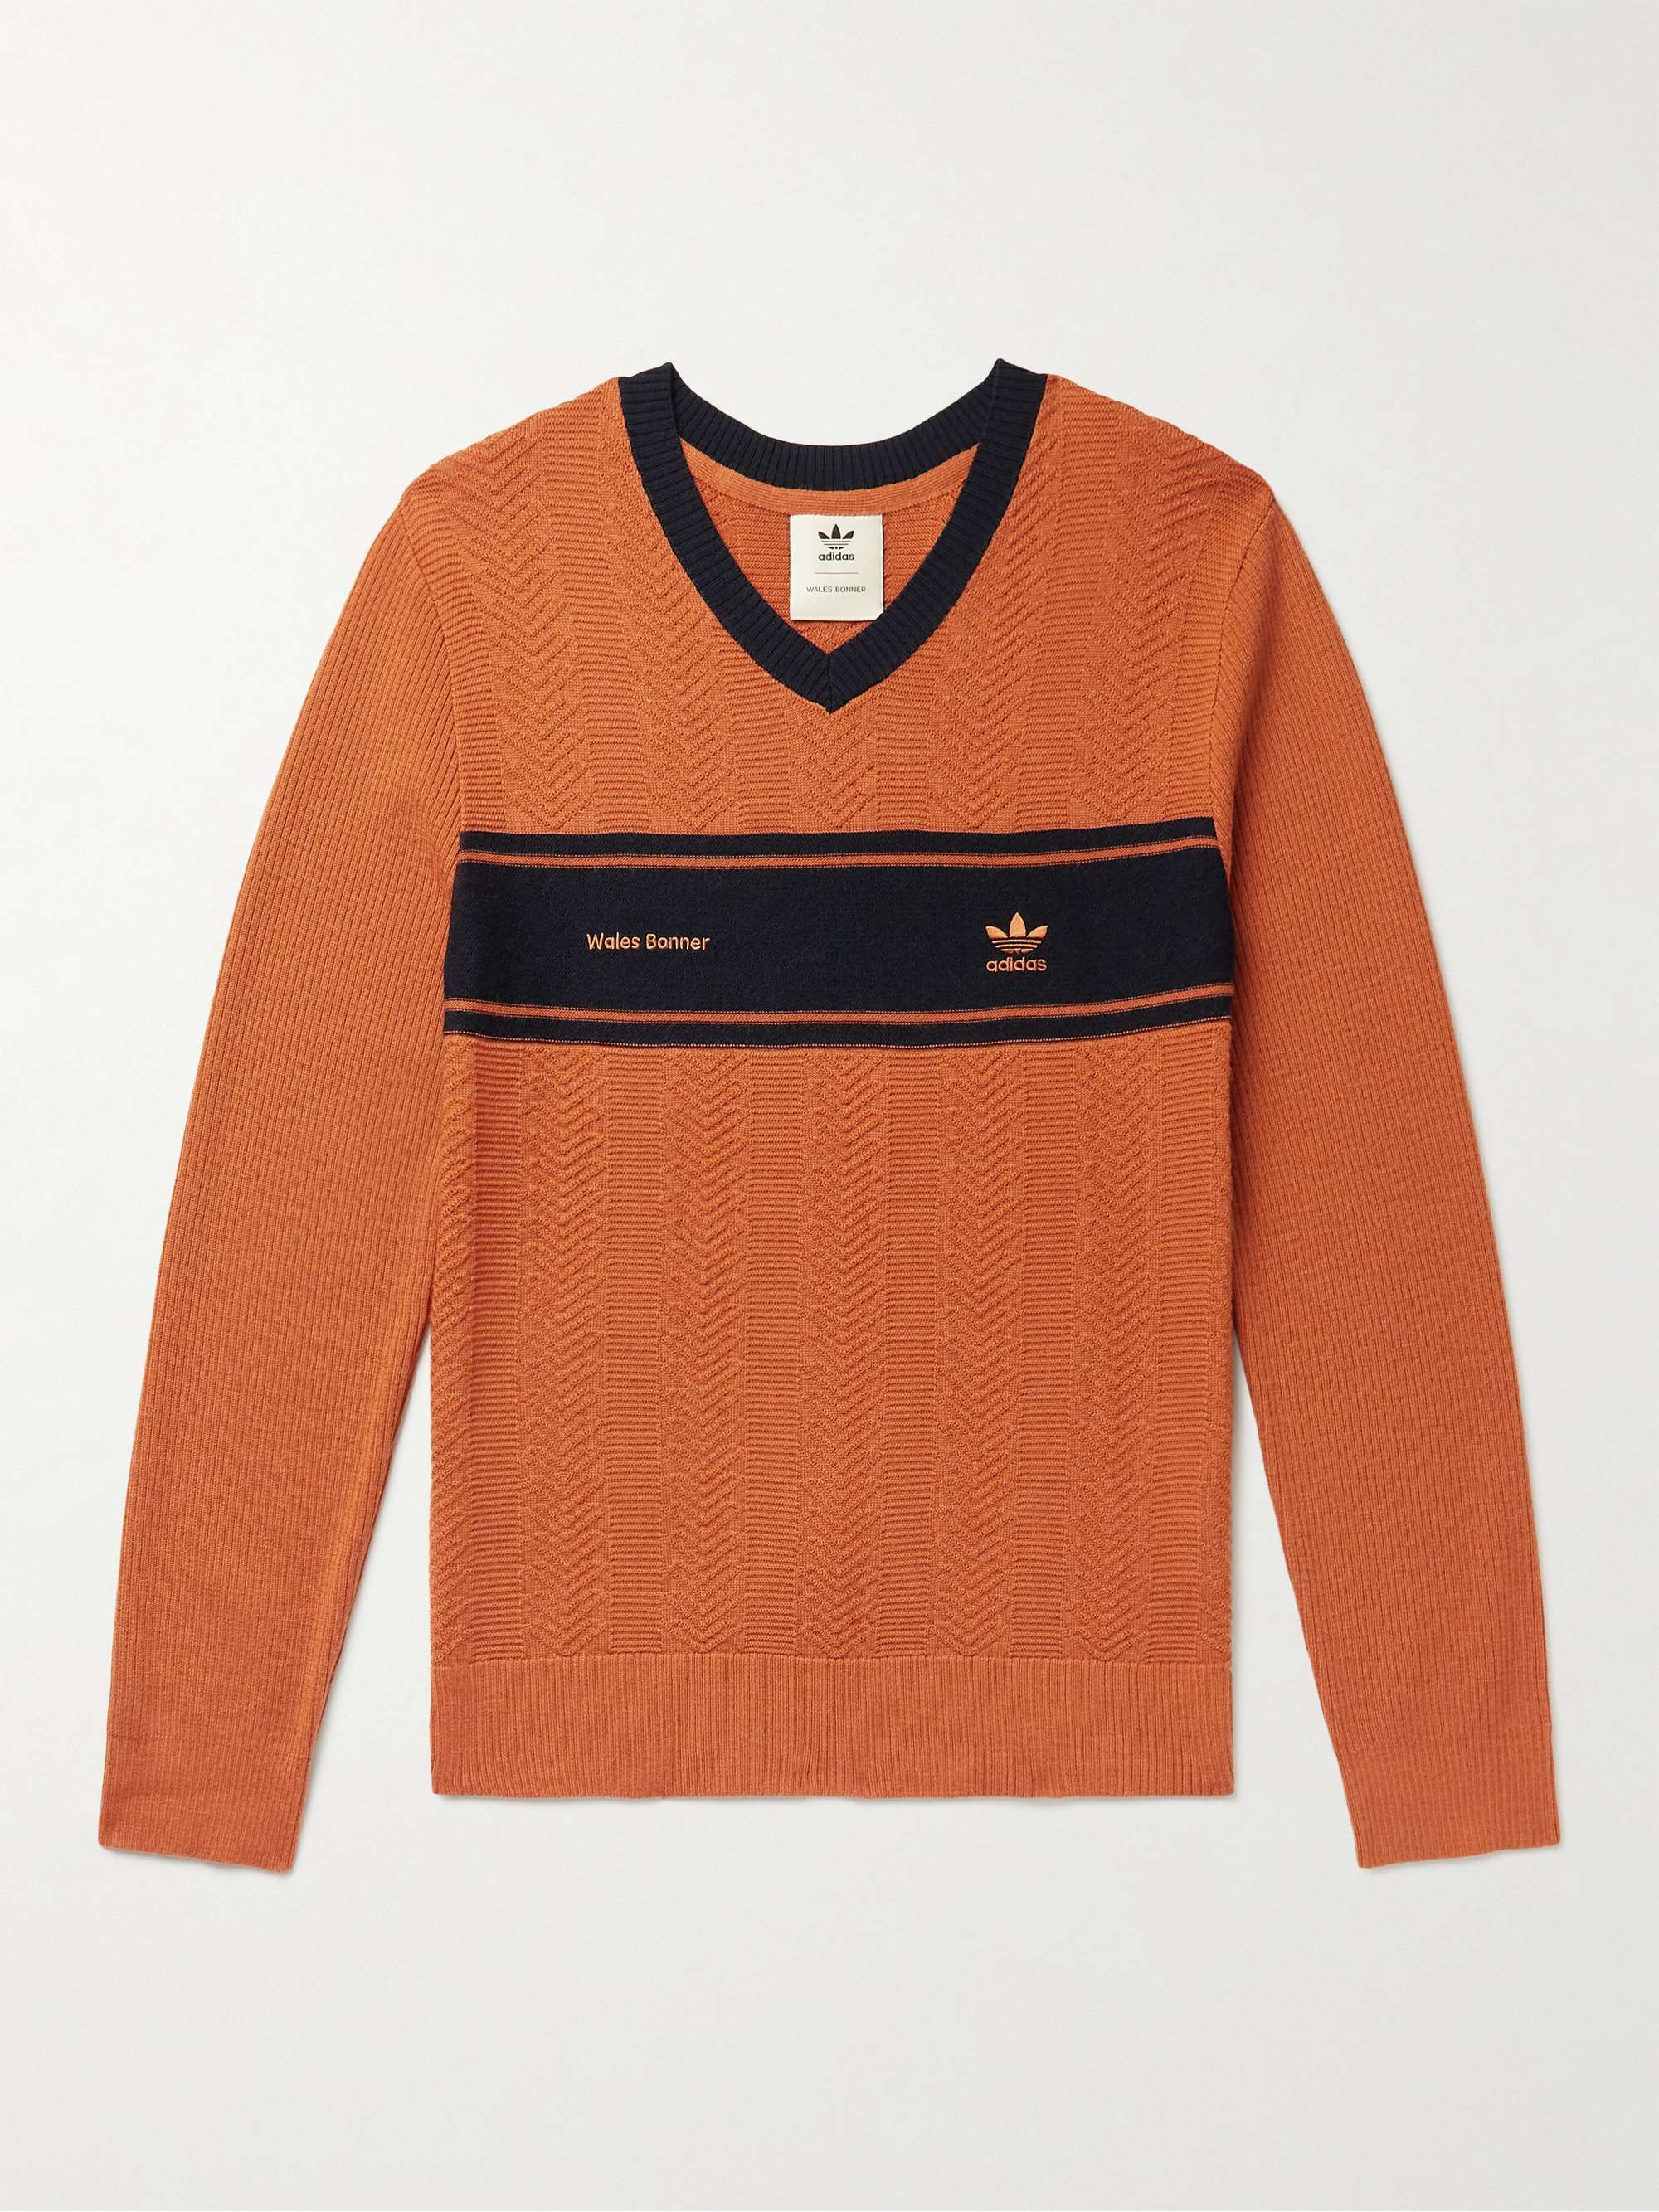 ADIDAS CONSORTIUM + Wales Bonner Striped Embroidered Ribbed Wool-Blend Sweater